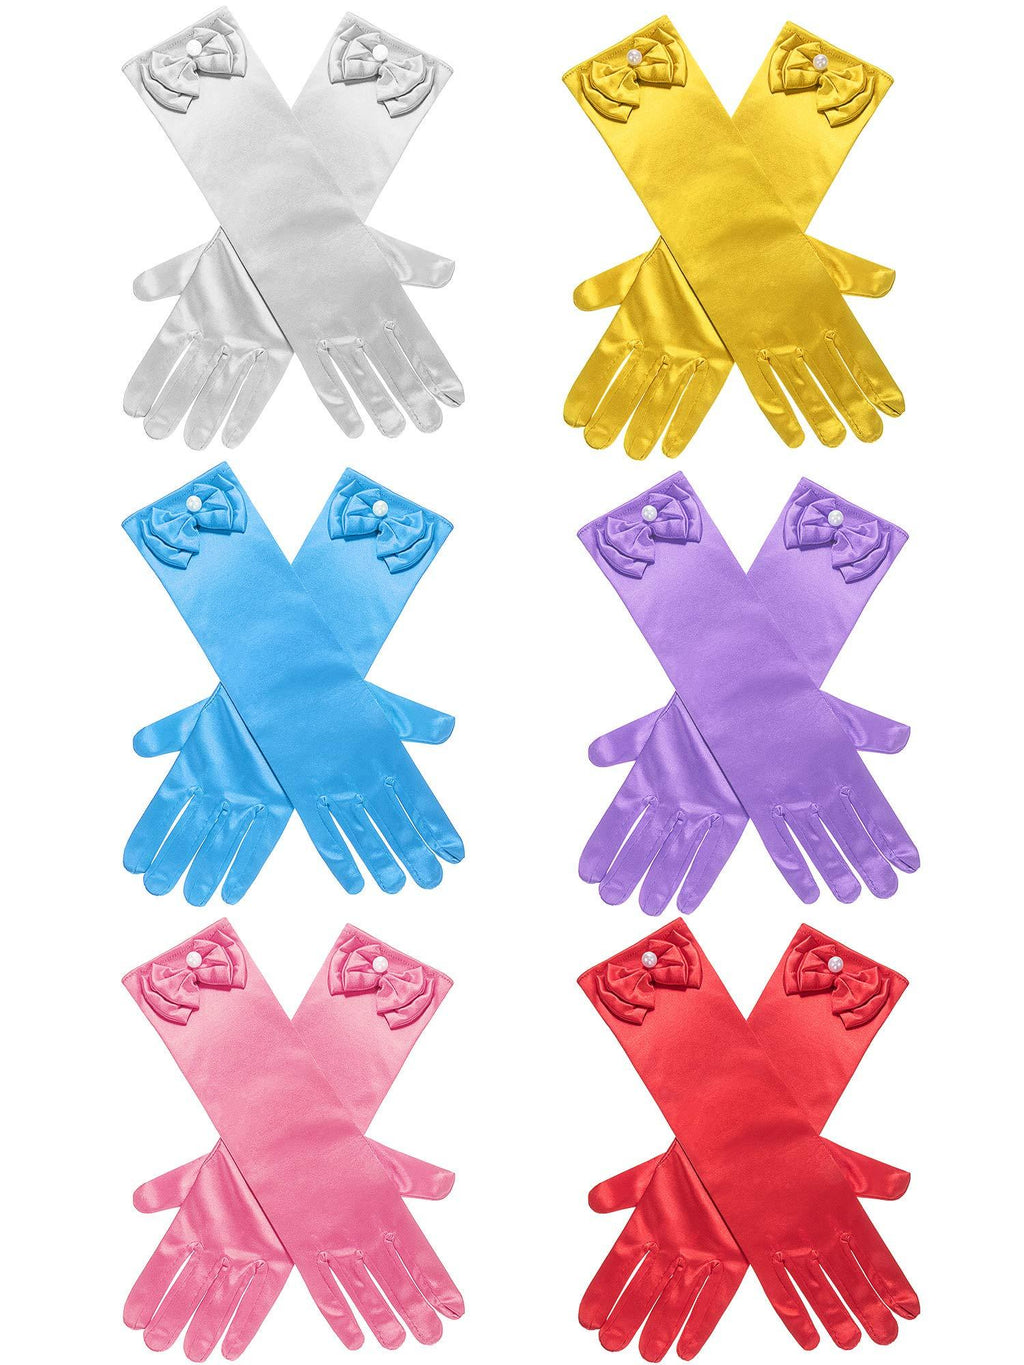 [Australia] - Zhanmai 6 Pairs Girls Satin Gloves Princess Dress Up Bows Gloves Long Formal Gloves for Party, Ages 3 to 8 Years Old Sky Blue, Red, Purple, Pink, White and Yellow 